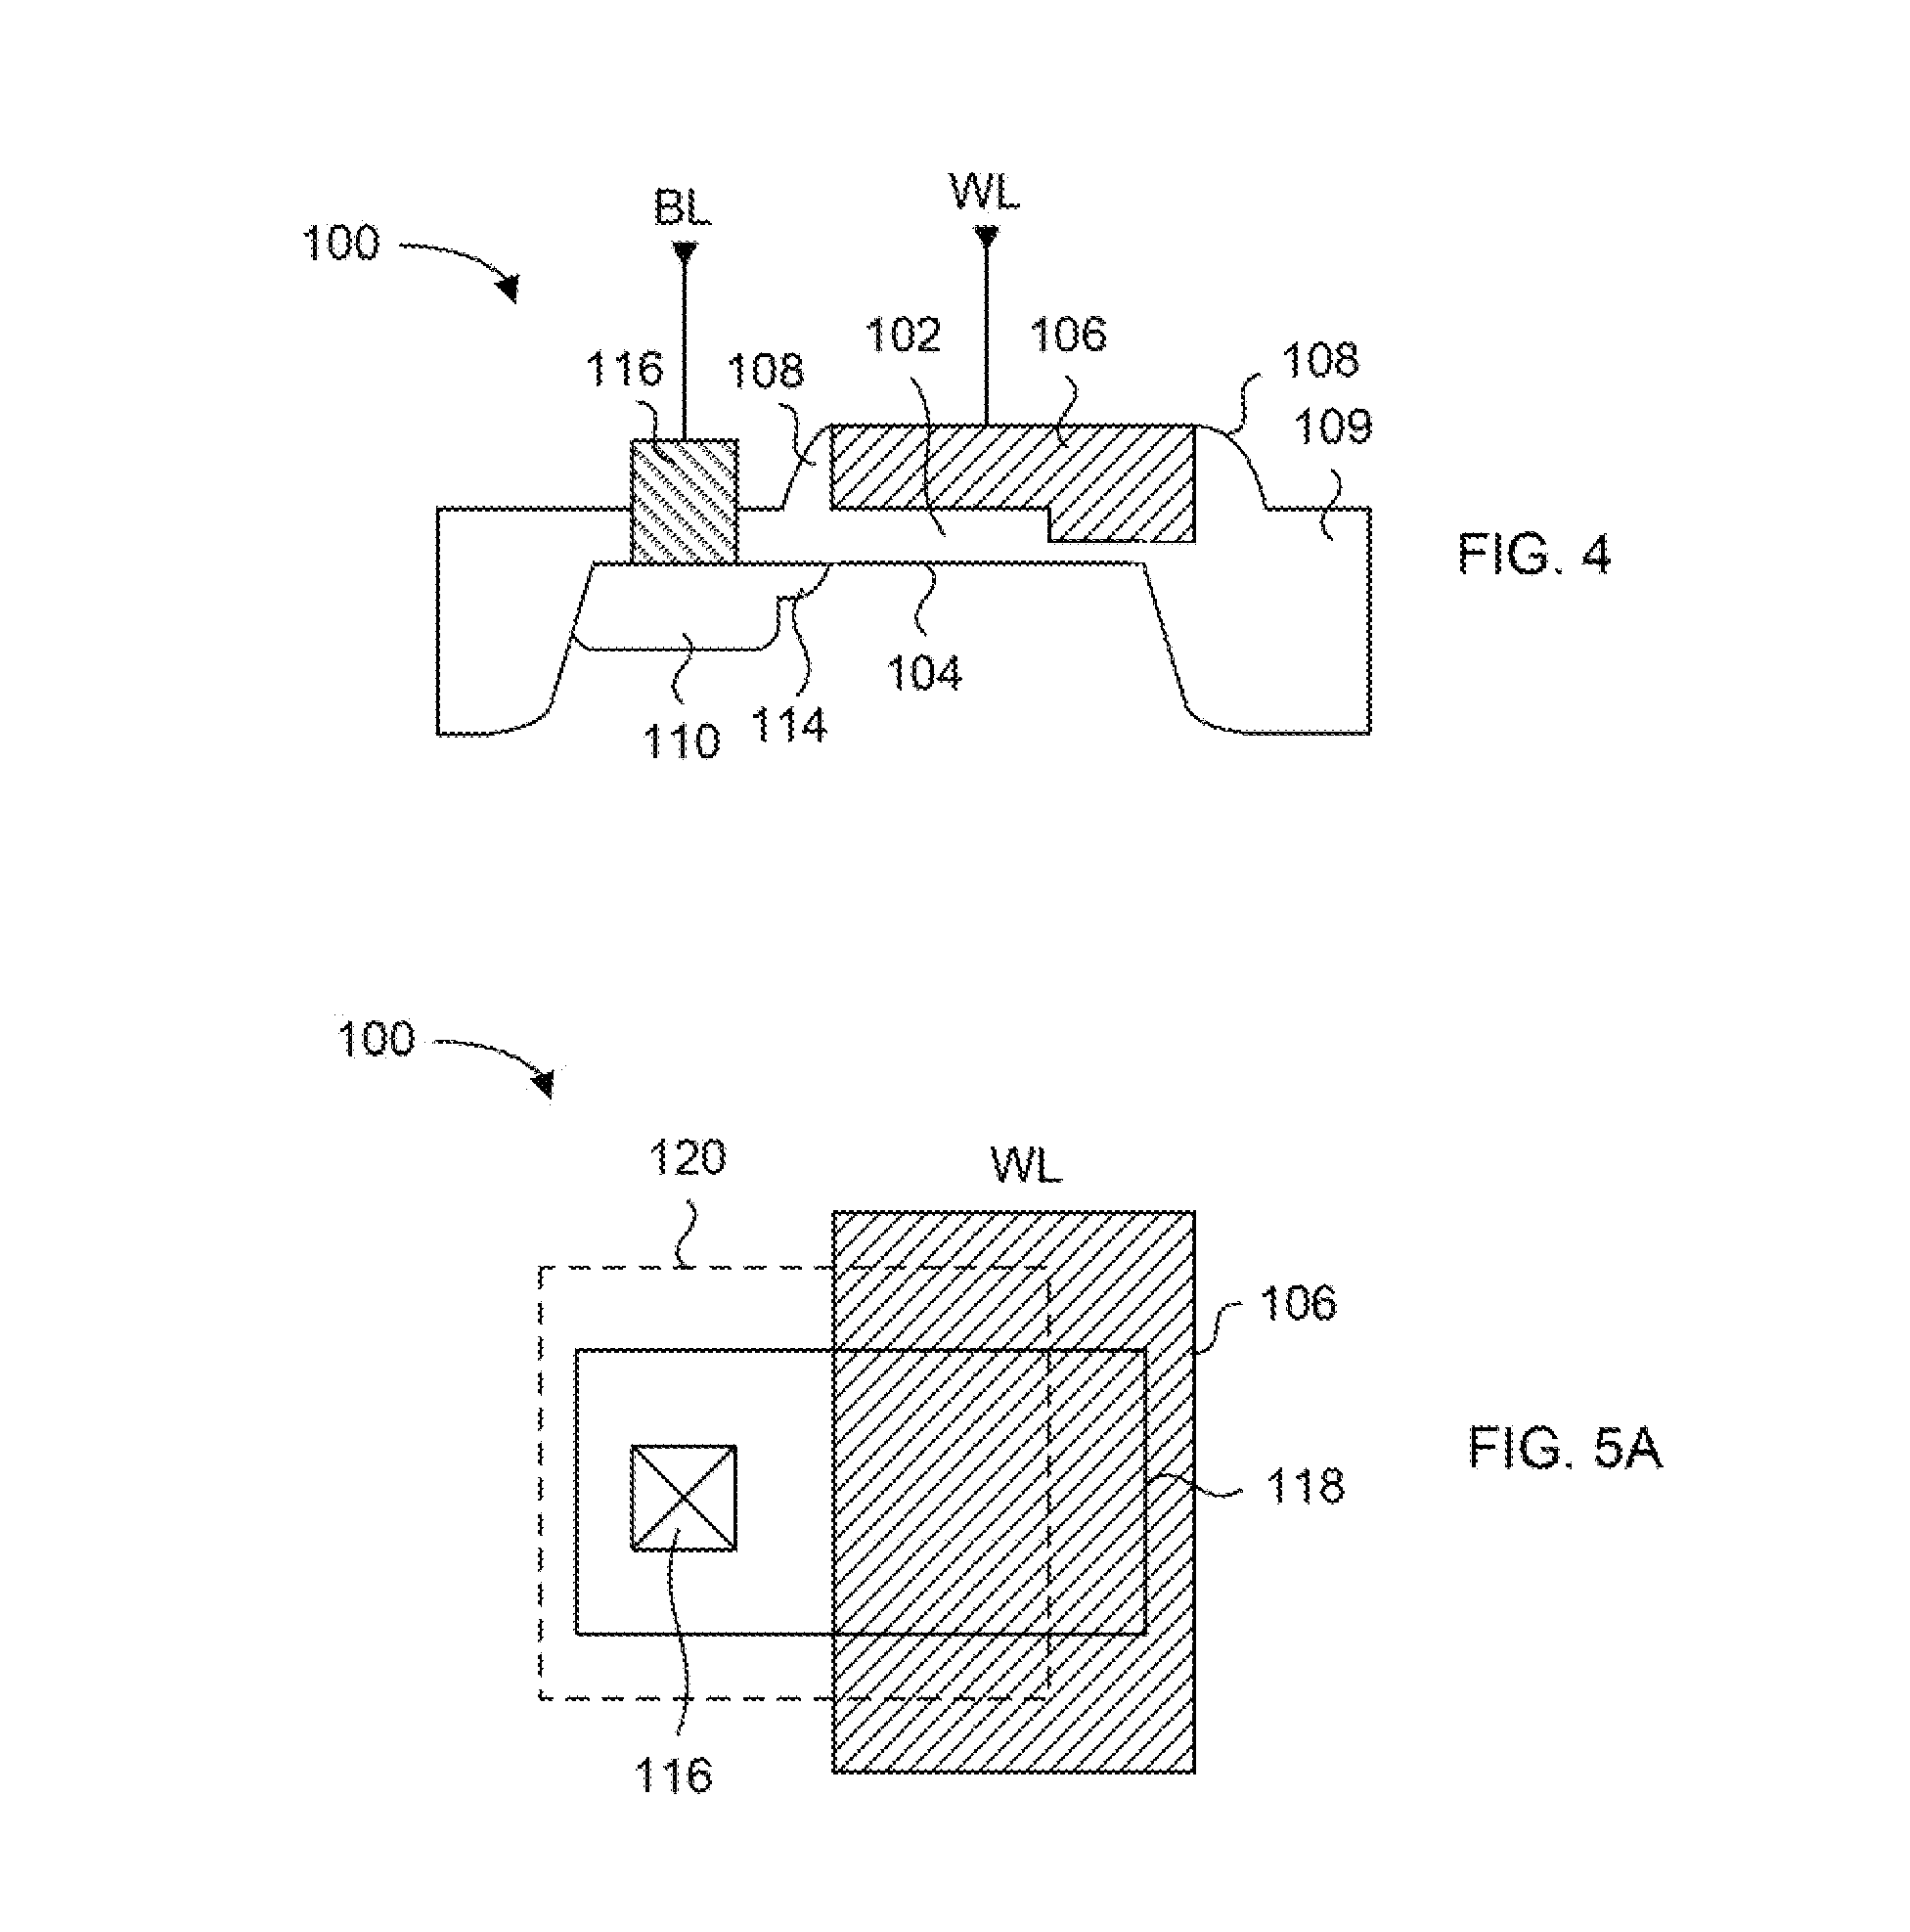 Anti-fuse memory cell